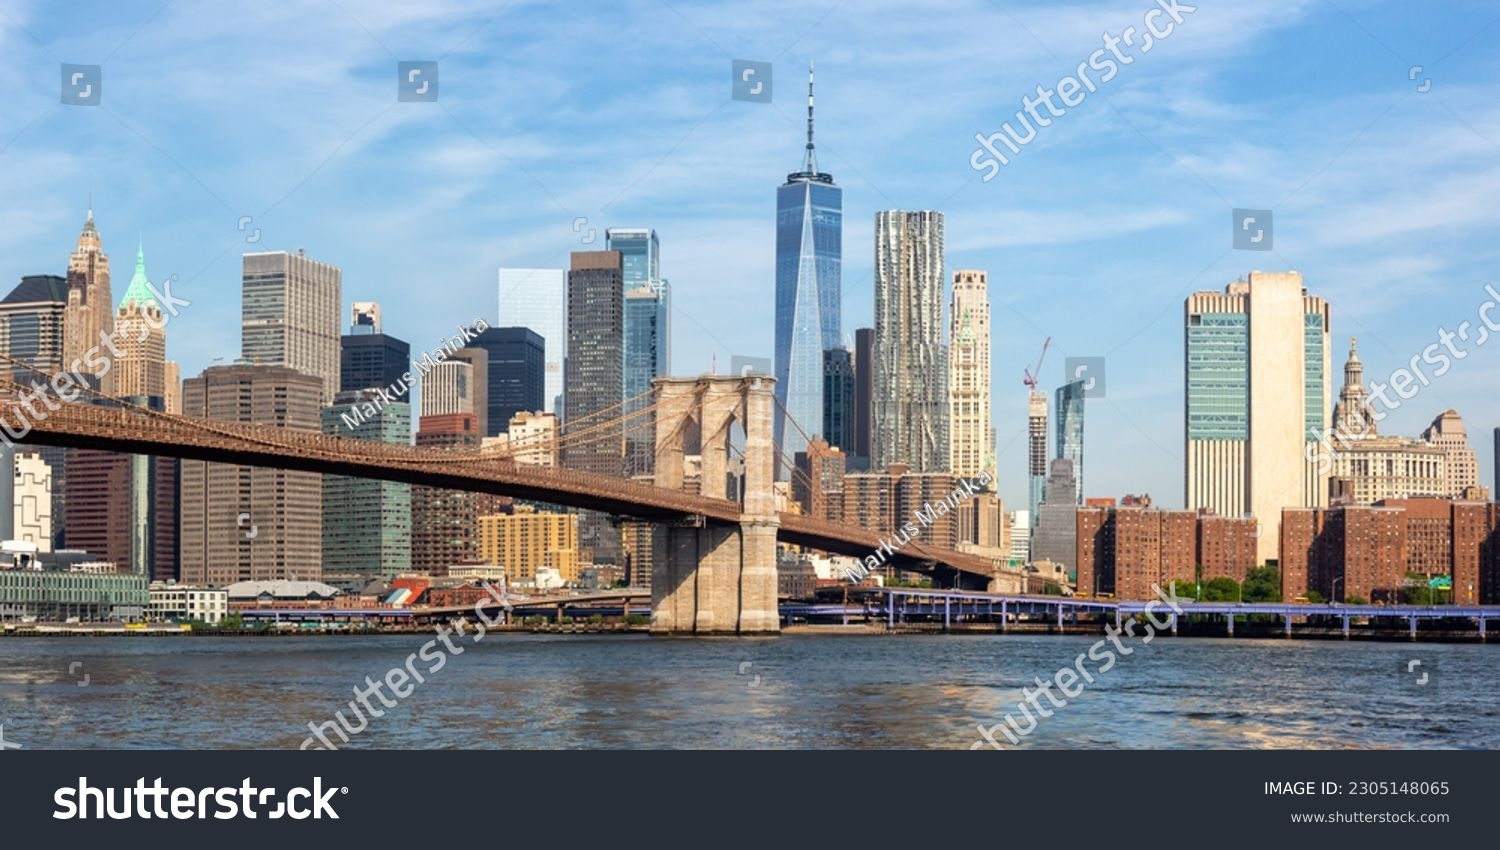 New York City skyline of Manhattan with Brooklyn Bridge and World Trade Center skyscraper panorama traveling in the United States #2305148065